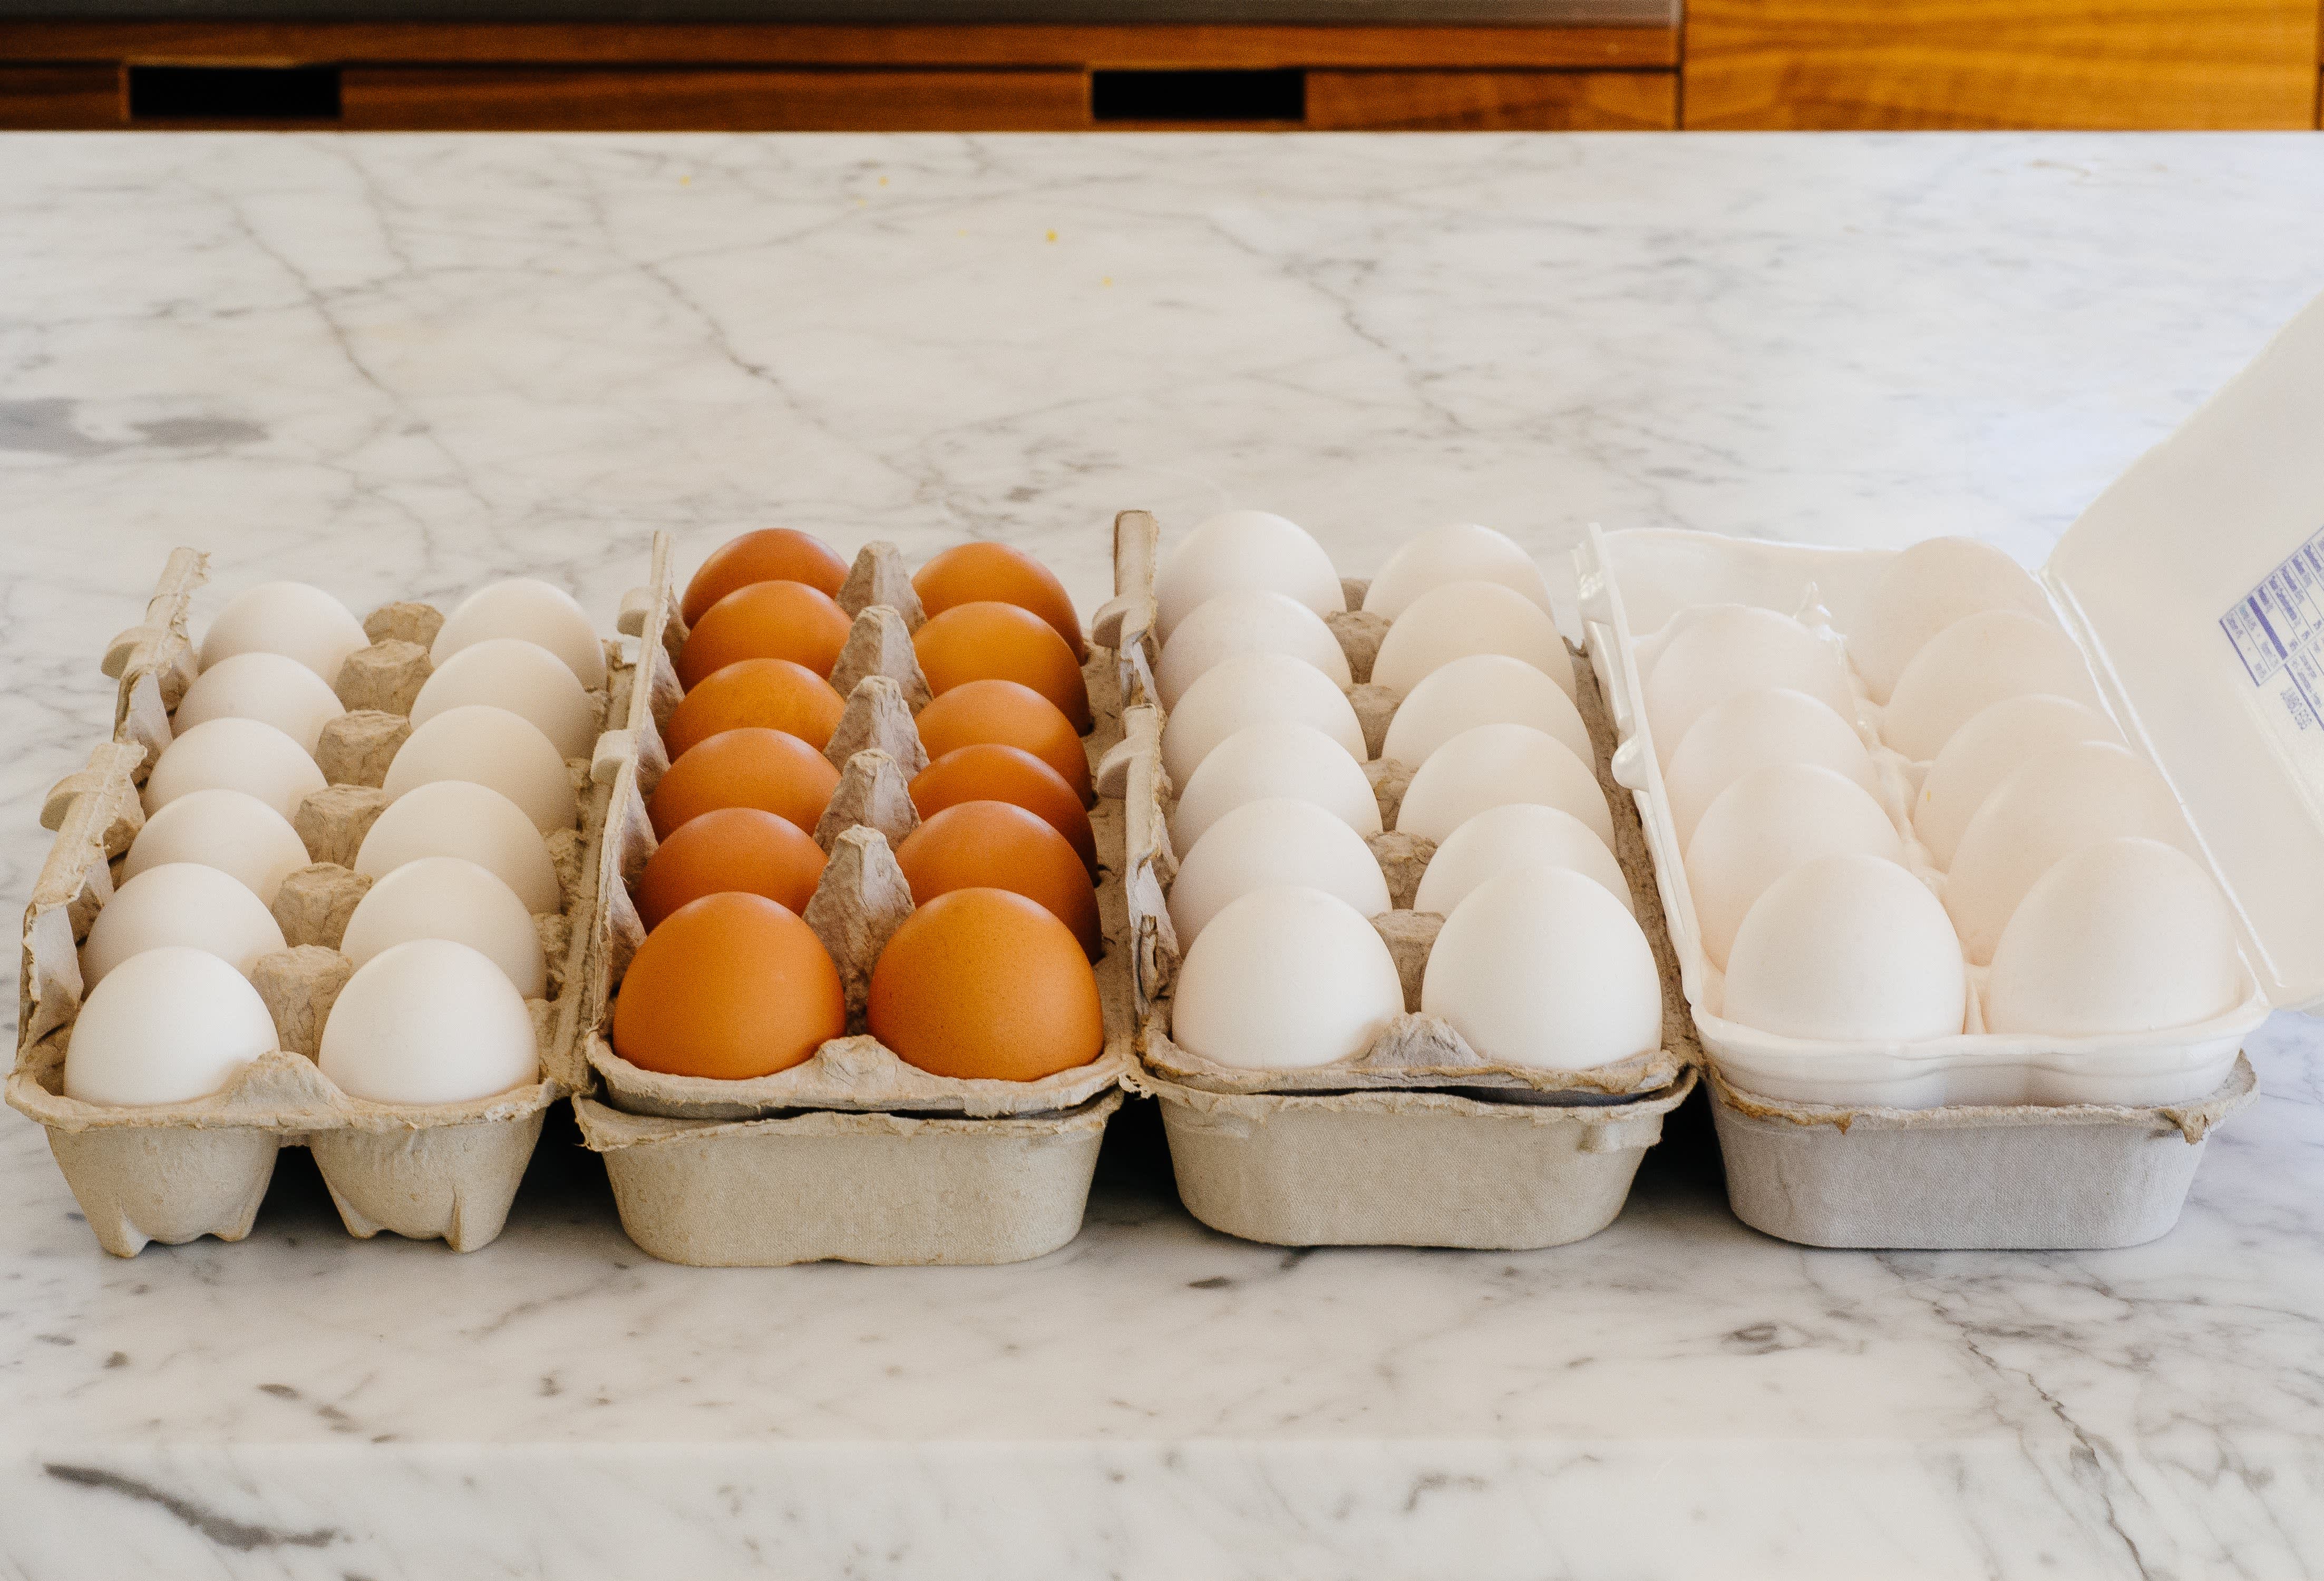 Eggs: Does Size Matter? - Charlotte's Lively Kitchen